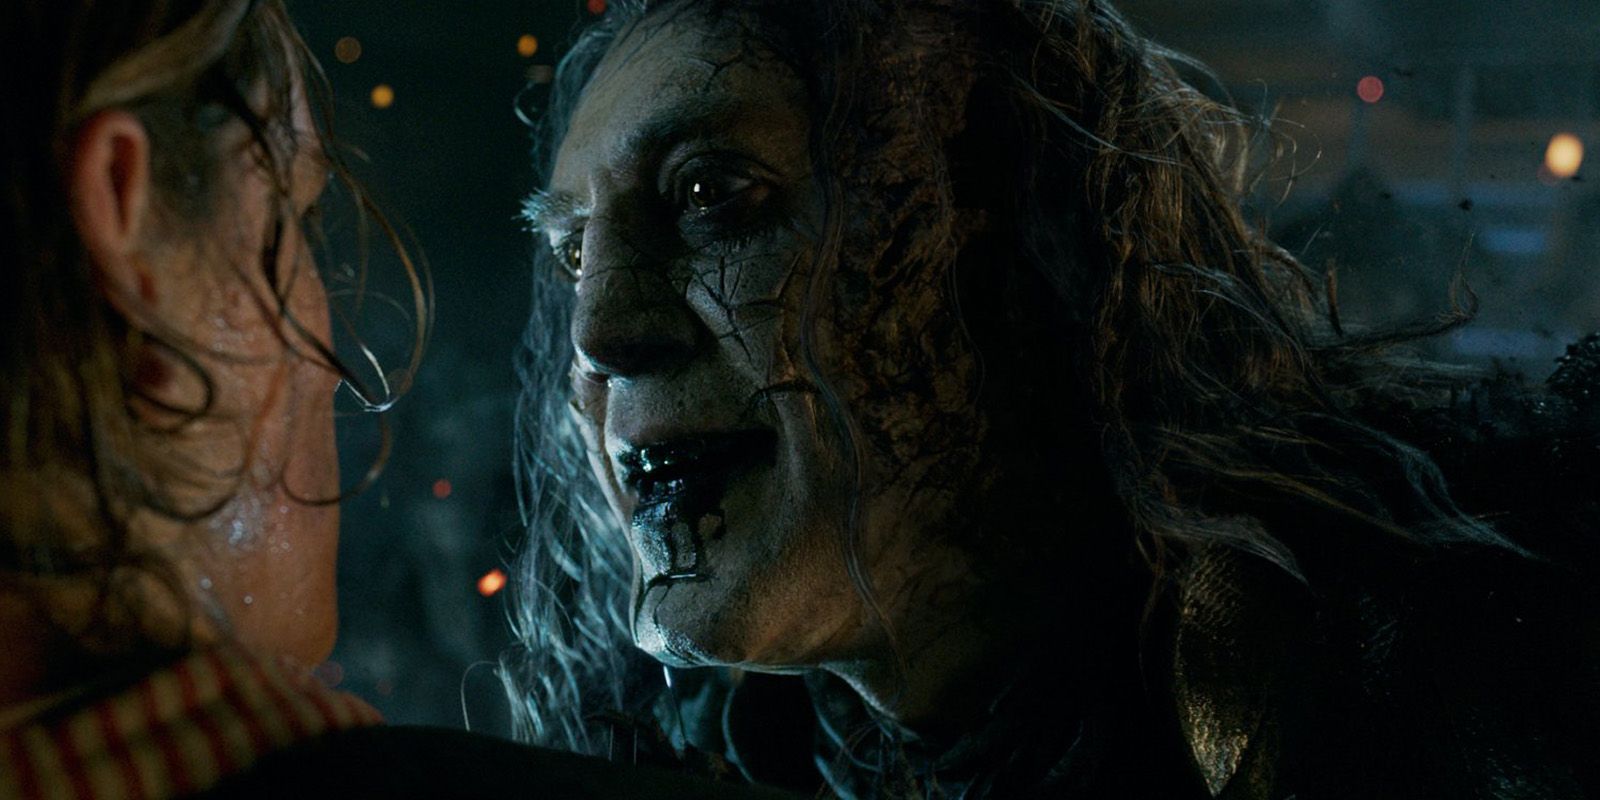 Javier Bardem as Armando Salazar in Pirates of the Caribbean: Dead Men Tell No Tales